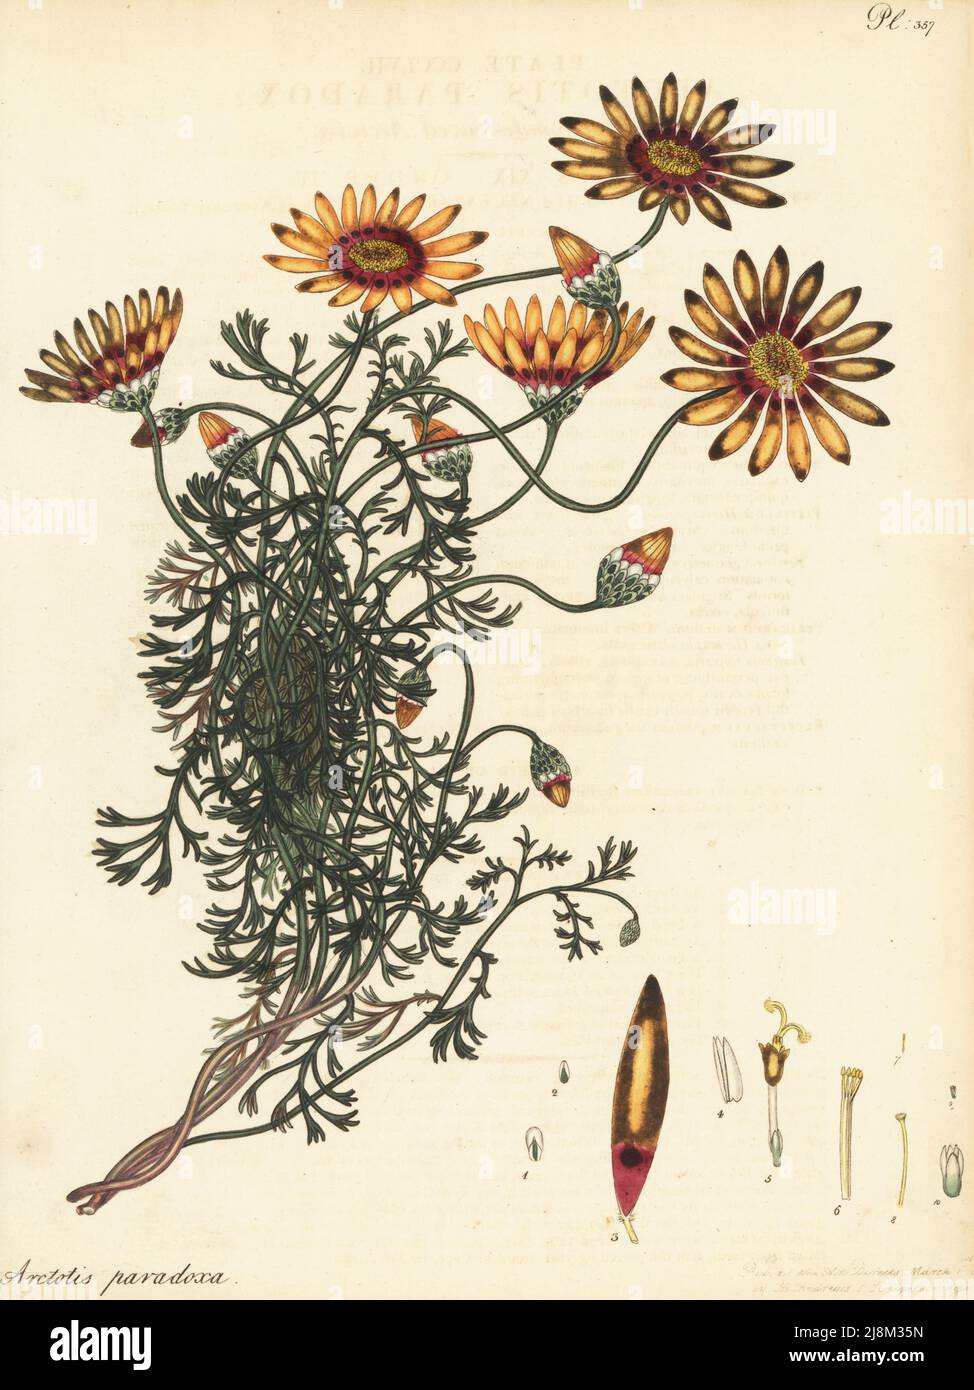 Ursinia speciosa. Chamomile-leaved arctotis, Arctotis paradoxa. Cape of Good Hope, South Africa, introduced by Scottish plant hunter Francis Masson. Copperplate engraving drawn, engraved and hand-coloured by Henry Andrews from his Botanical Register, Volume 5, self-published in Knightsbridge, London, 1804. Stock Photo